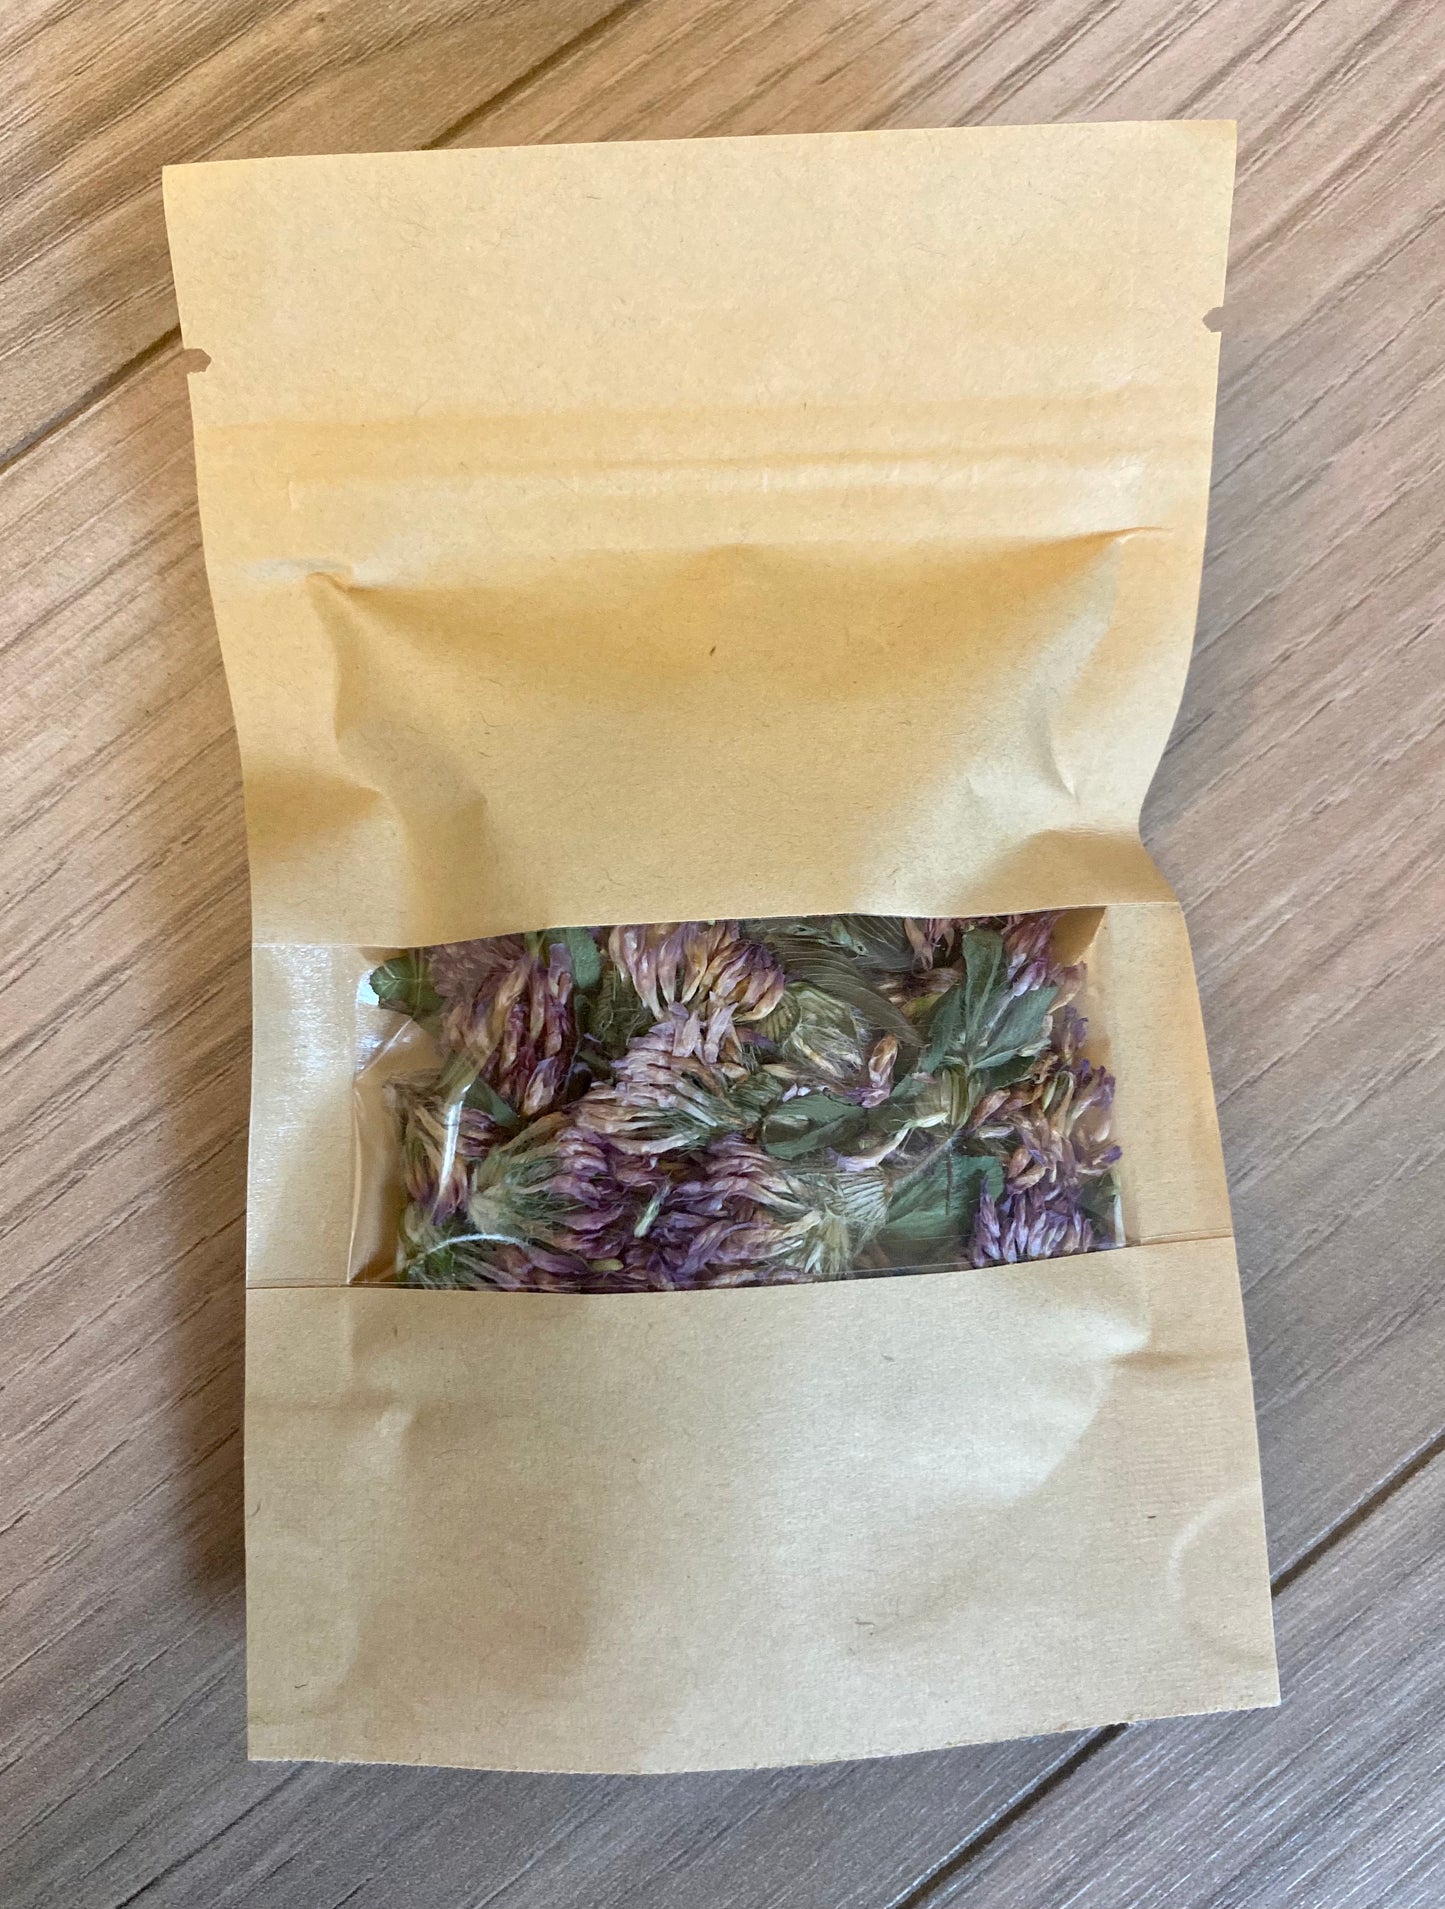 Dehydrated red clover flowers 100% natural - Product of Quebec